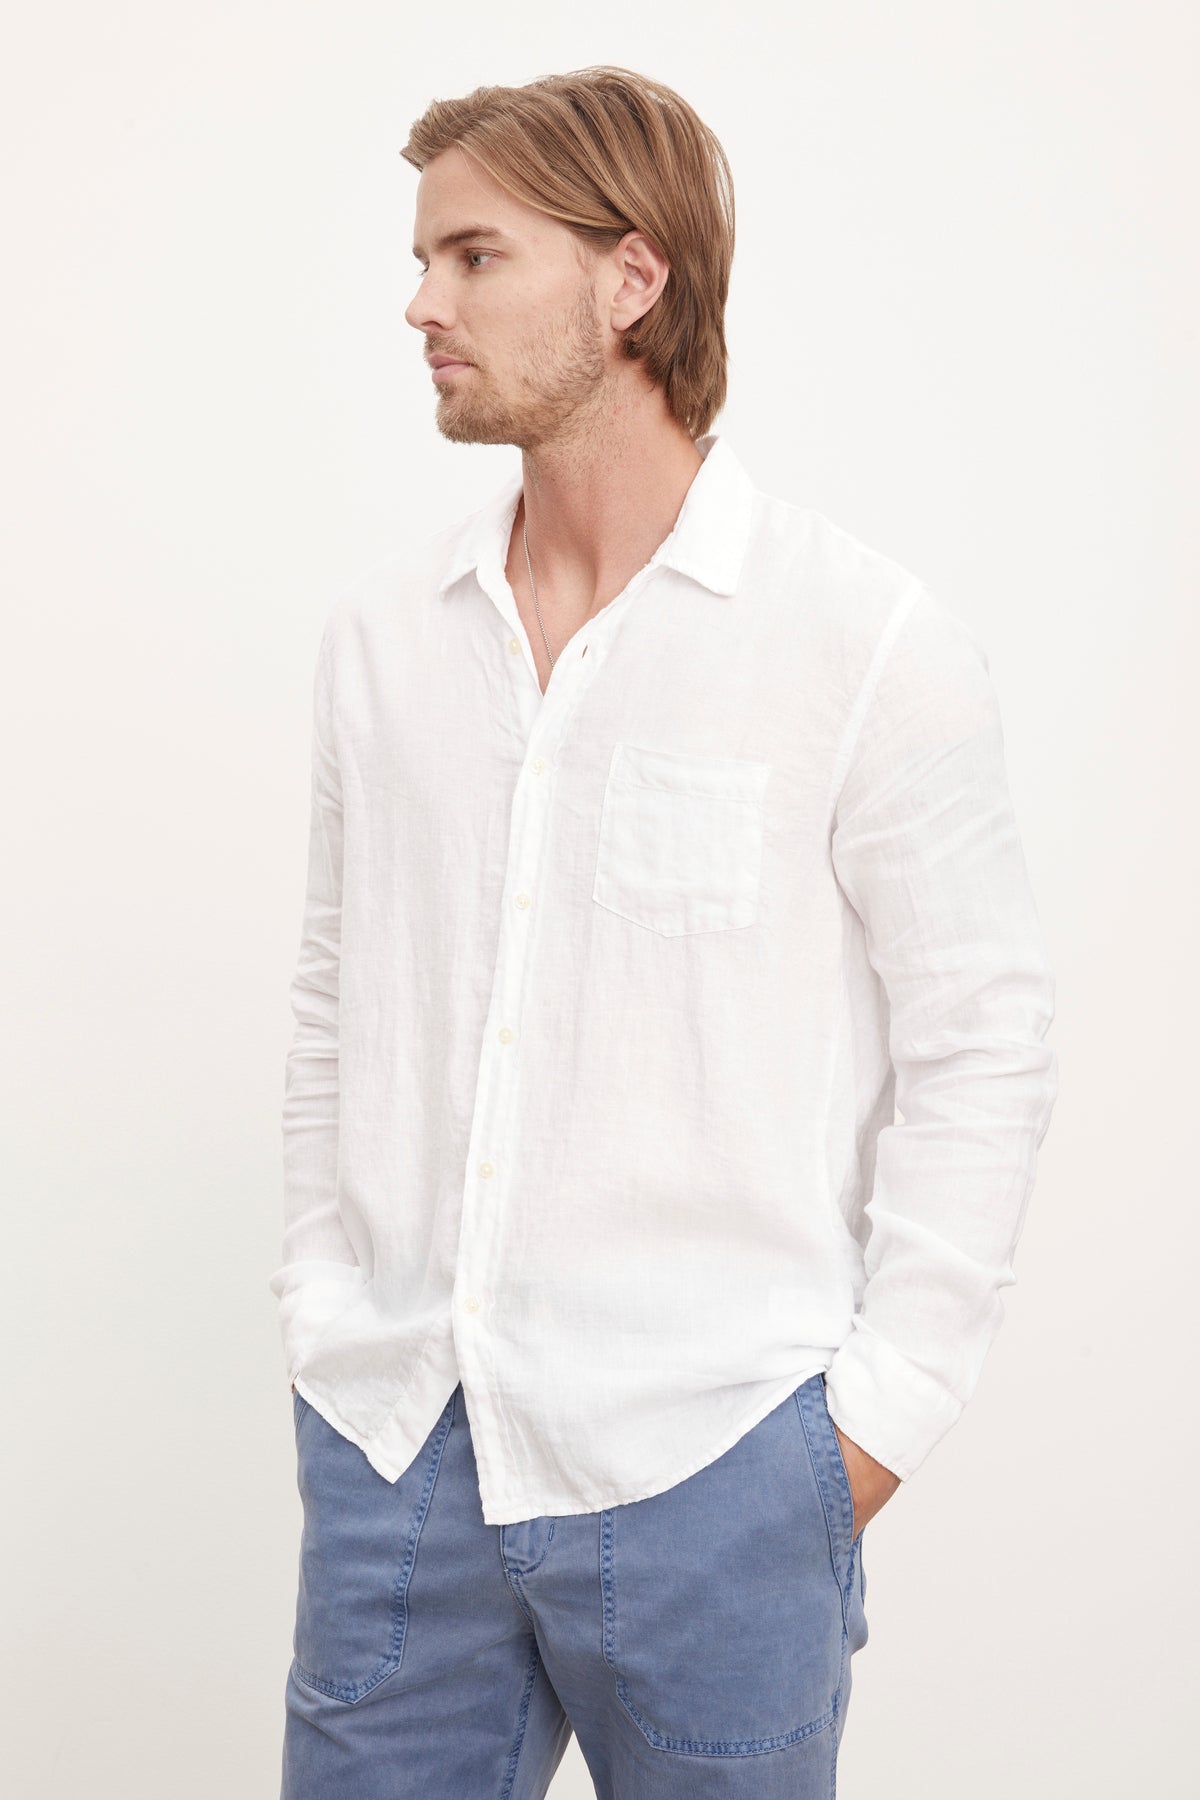 A stylish man sporting a white Velvet by Graham & Spencer Benton Linen Button-Up Shirt and blue pants.-36009360163009